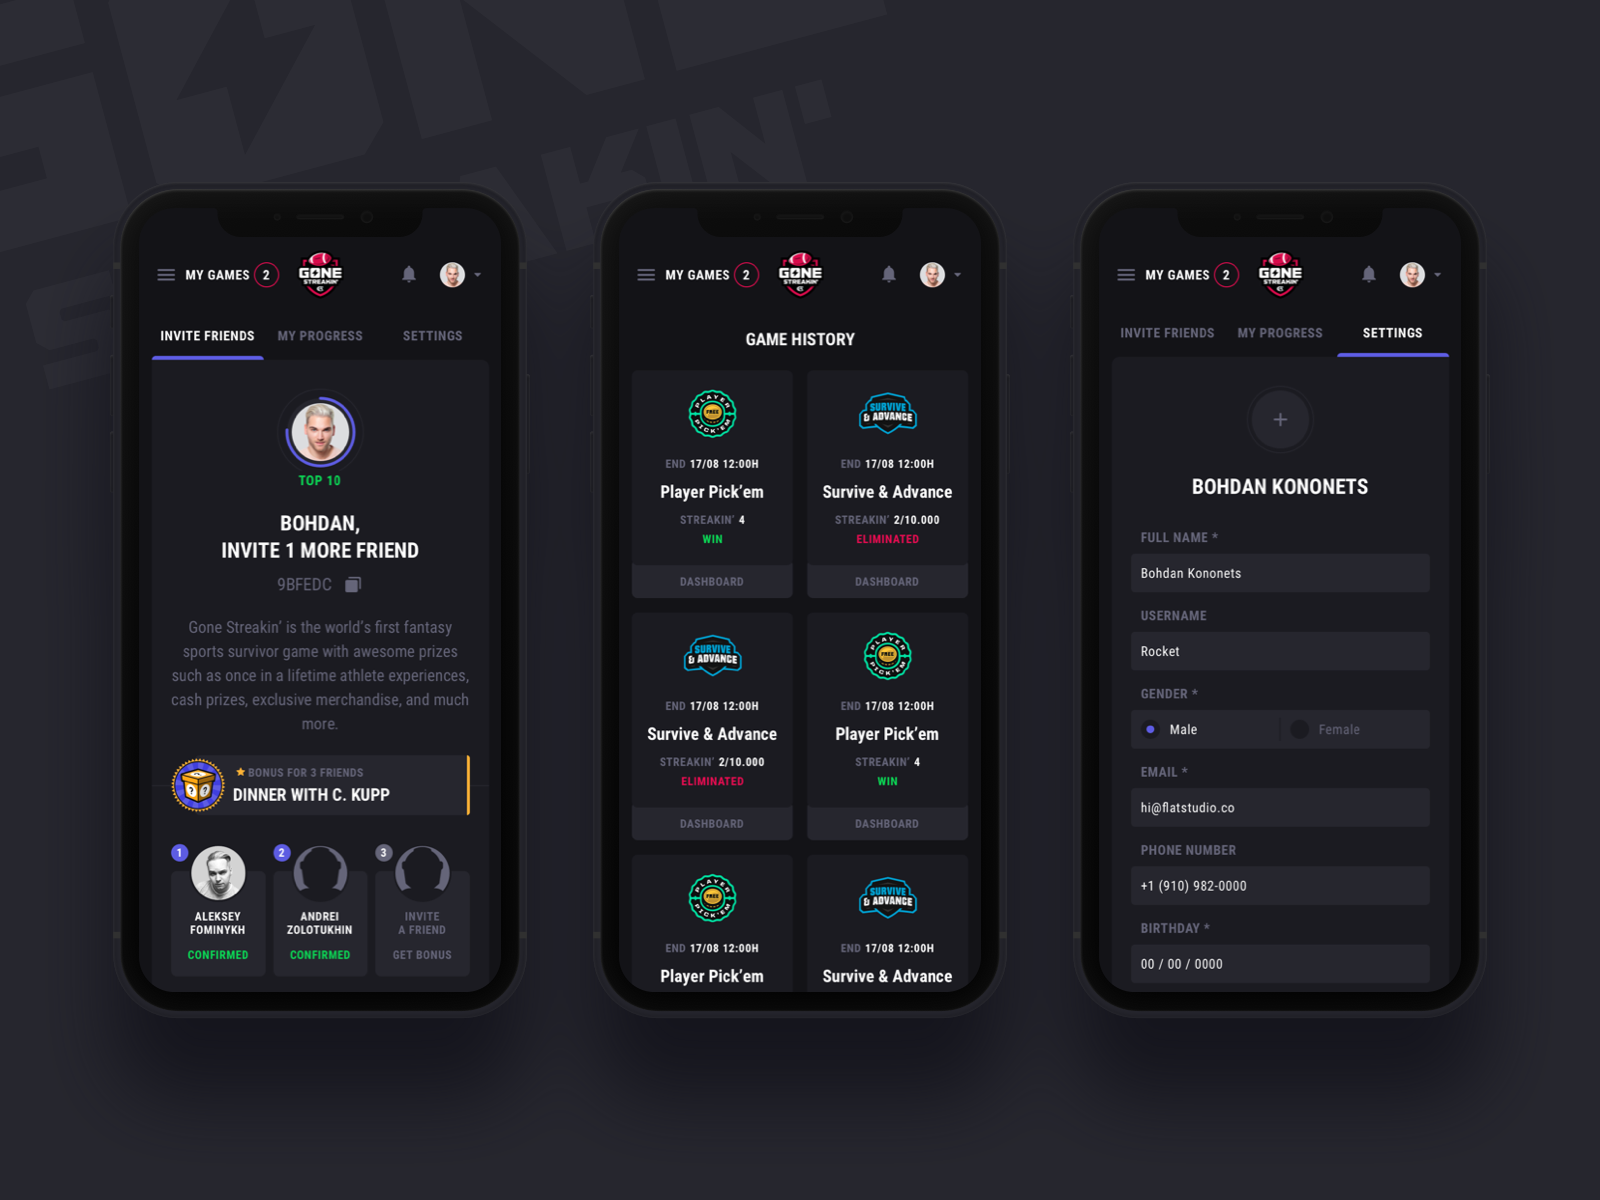 action network sports betting app input pick